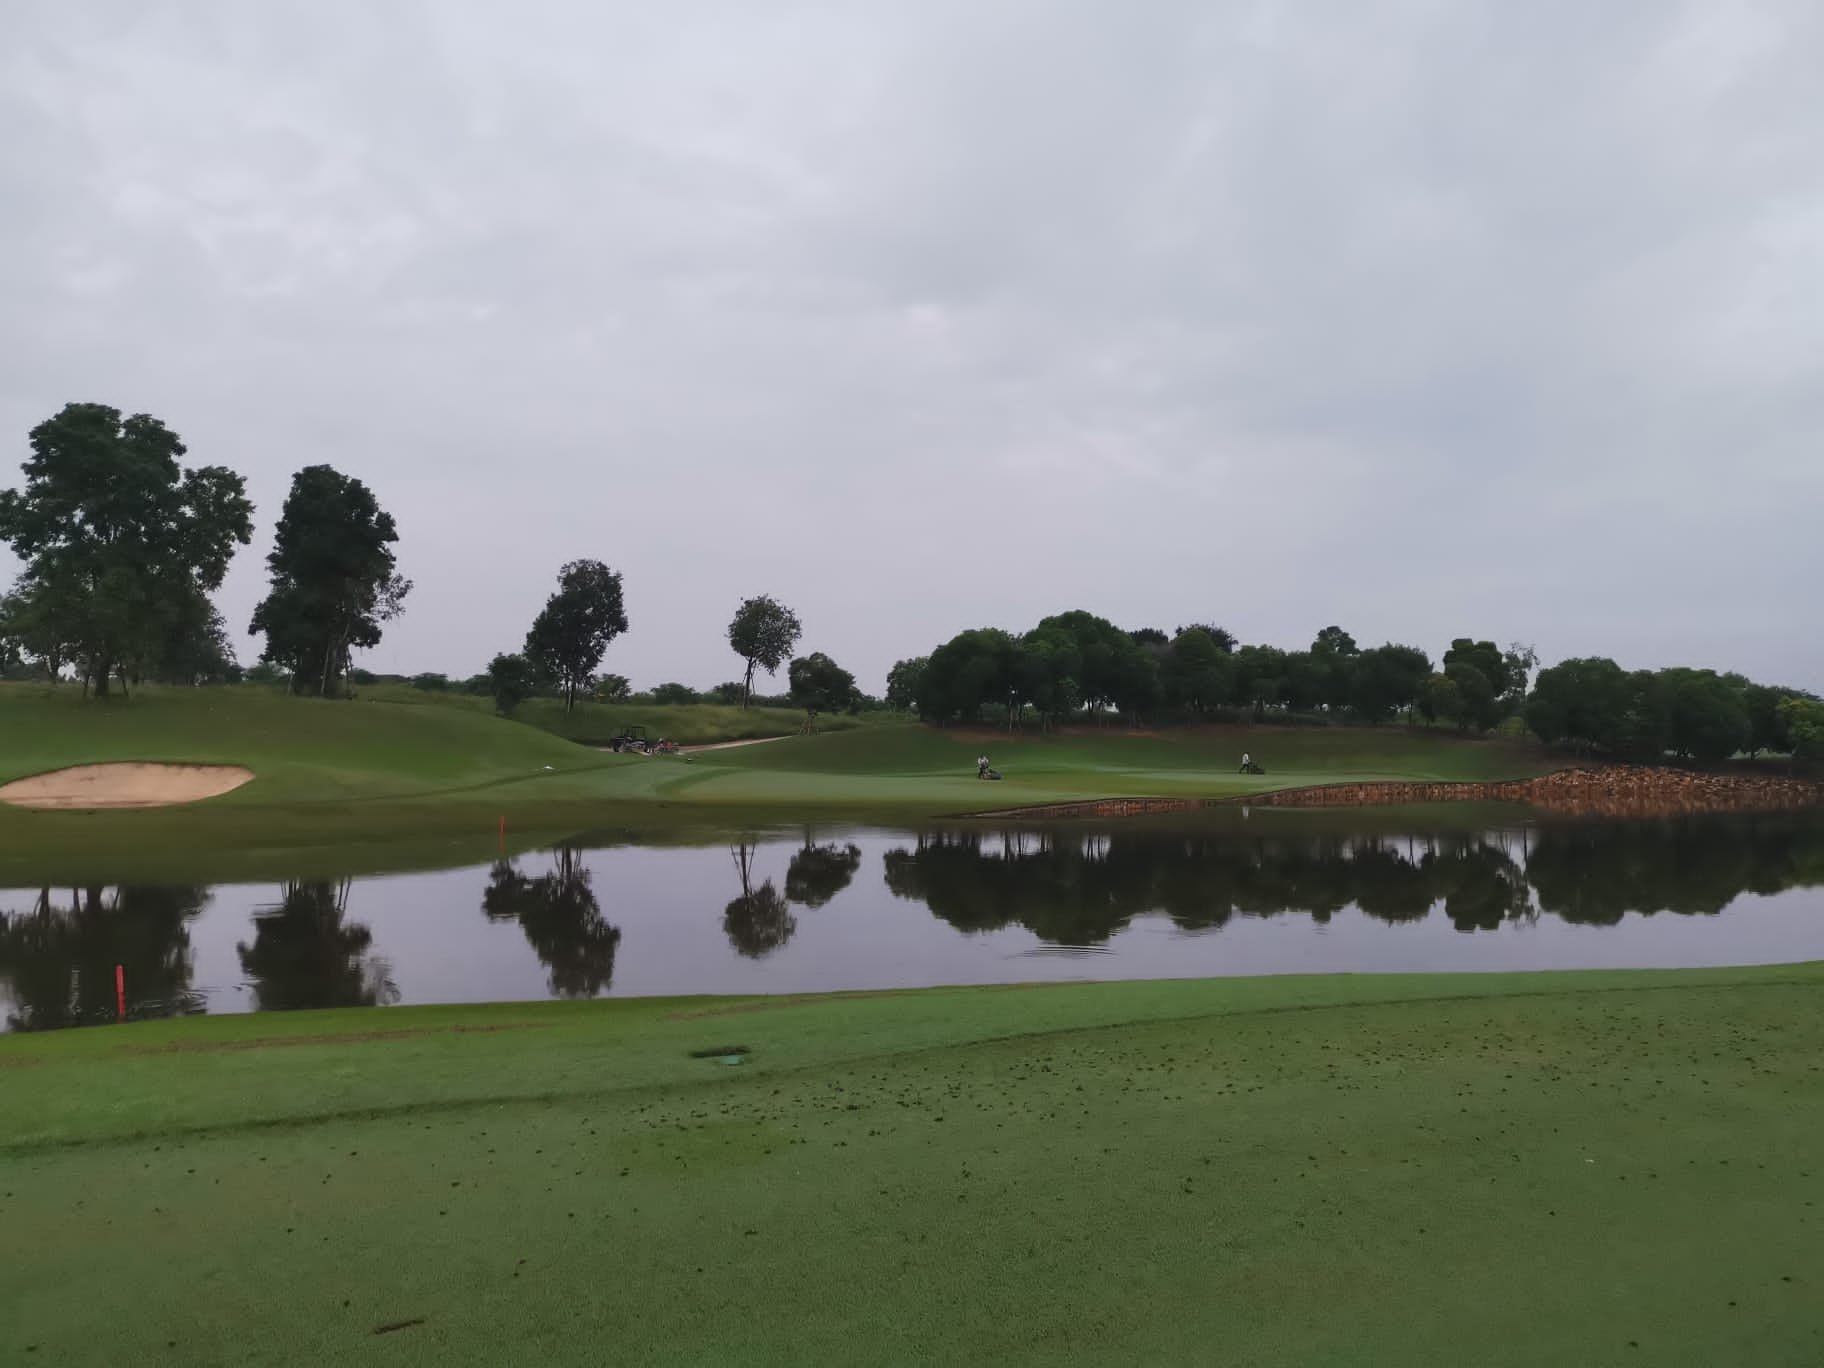  The 3rd approach and part of the fairway submerged. 